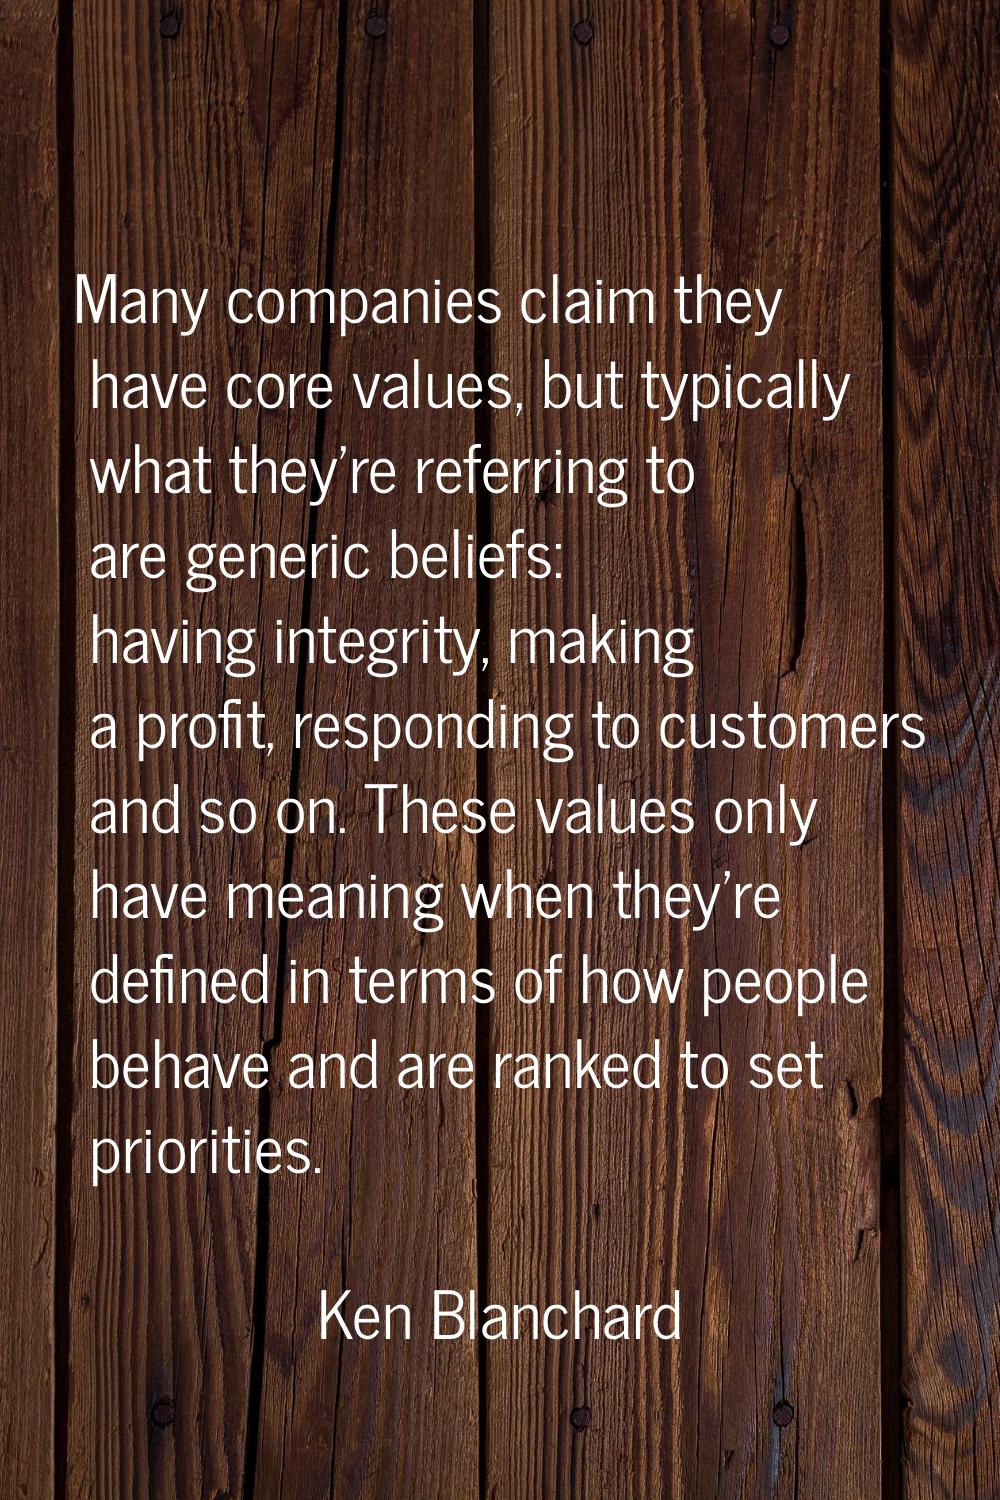 Many companies claim they have core values, but typically what they're referring to are generic bel